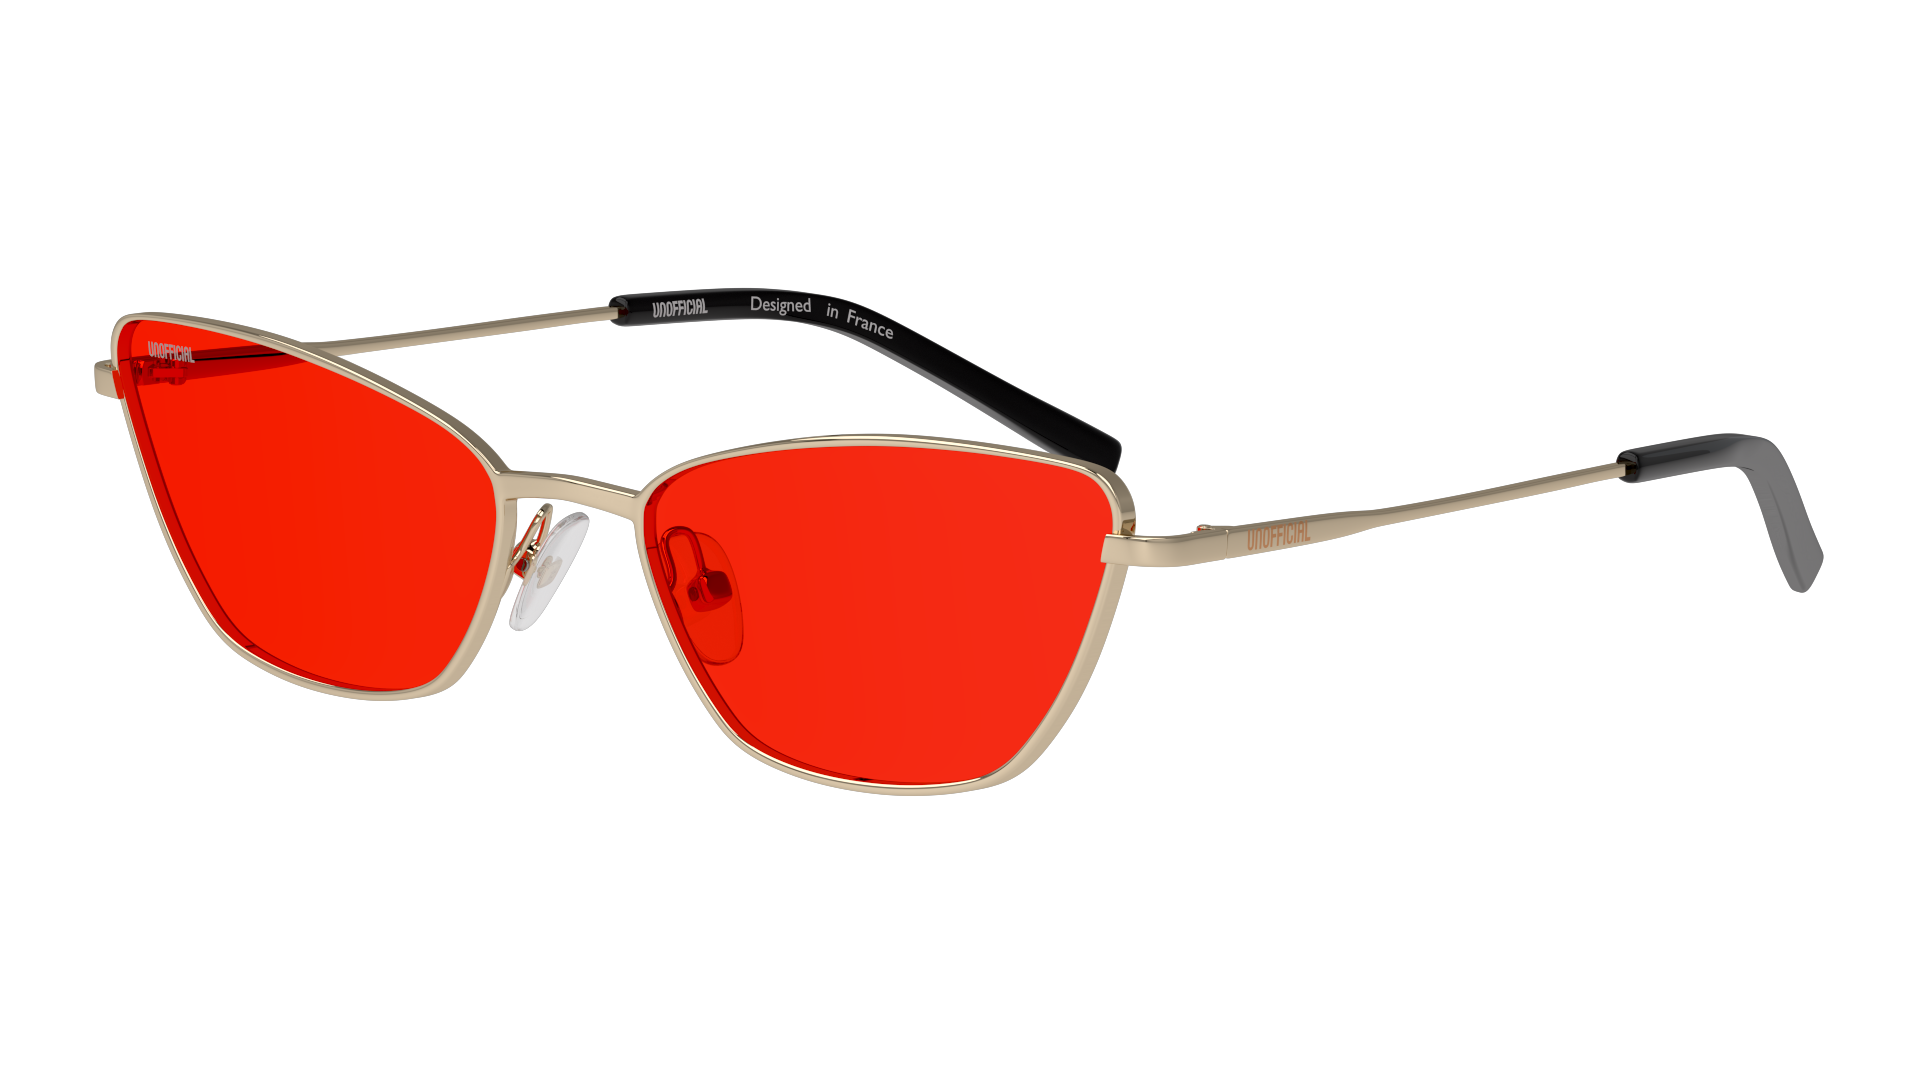 Angle_Left01 Unofficial UNSF0136 Sunglasses Red / Gold